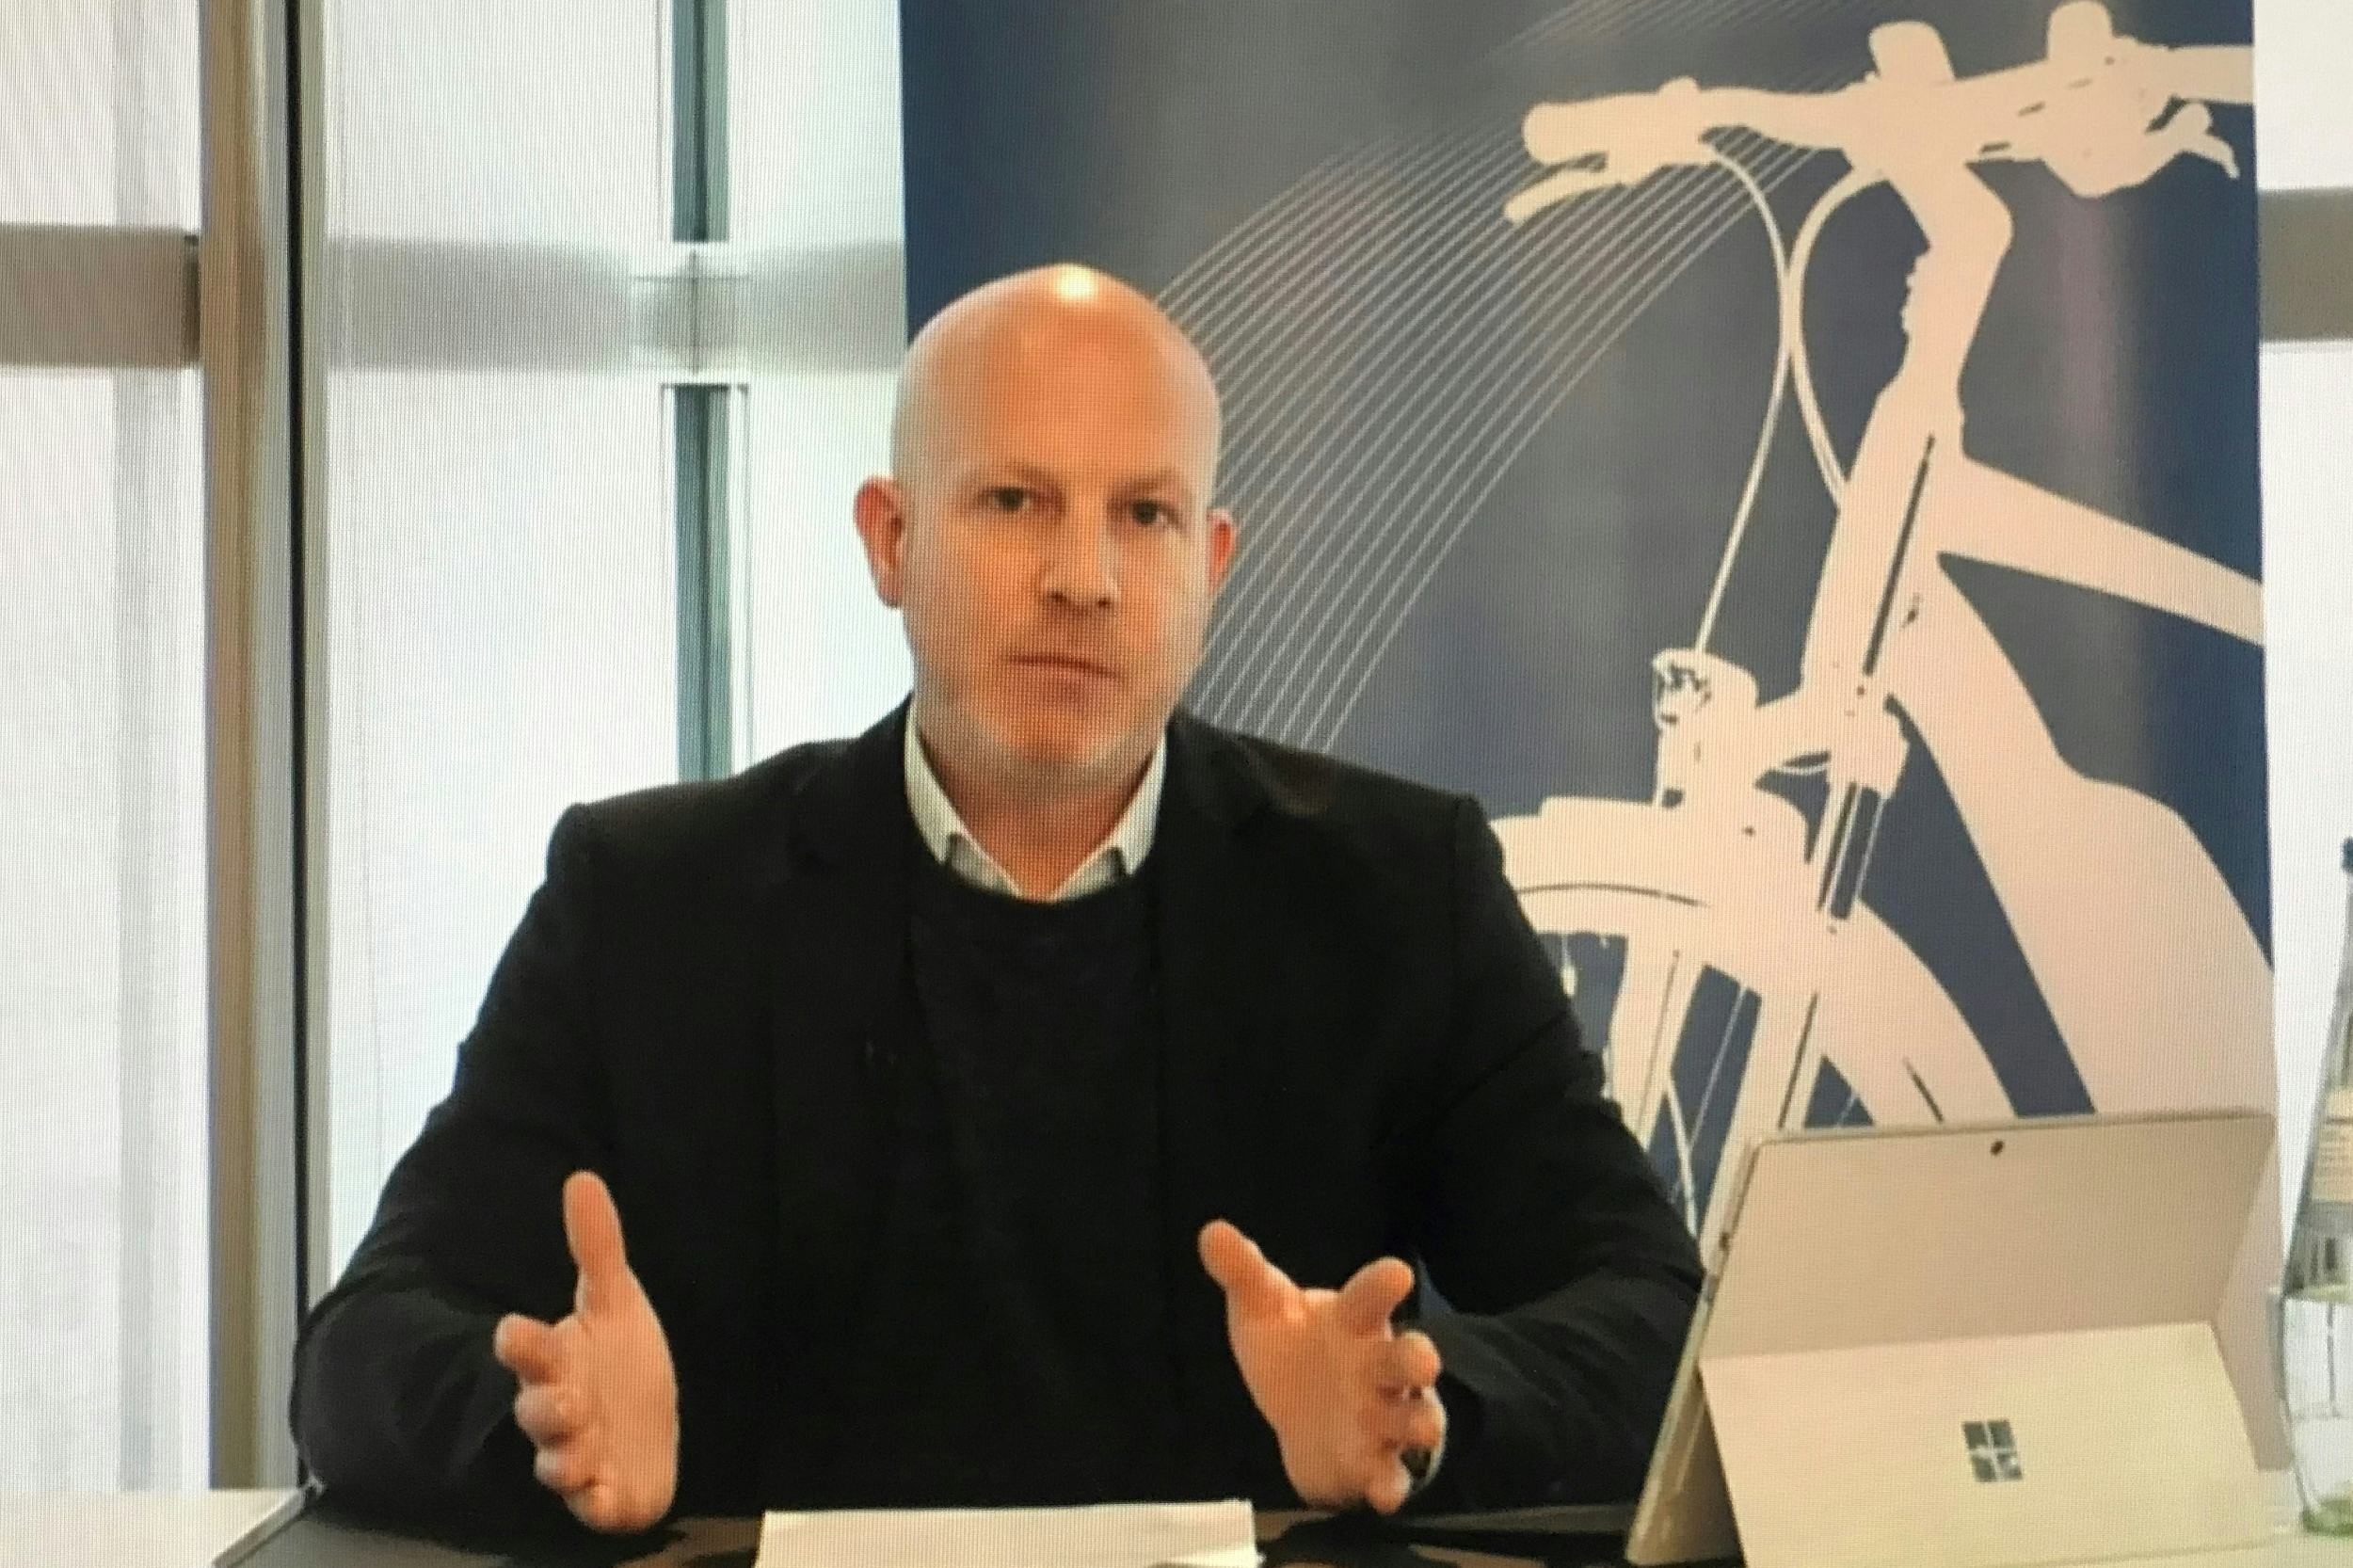 “For 2021 we anticipate on a market expansion of another 20% on top of the 2020 sales,” said said David Eisenberger representing the German industry association ZIV. – Photo Bike Europe 